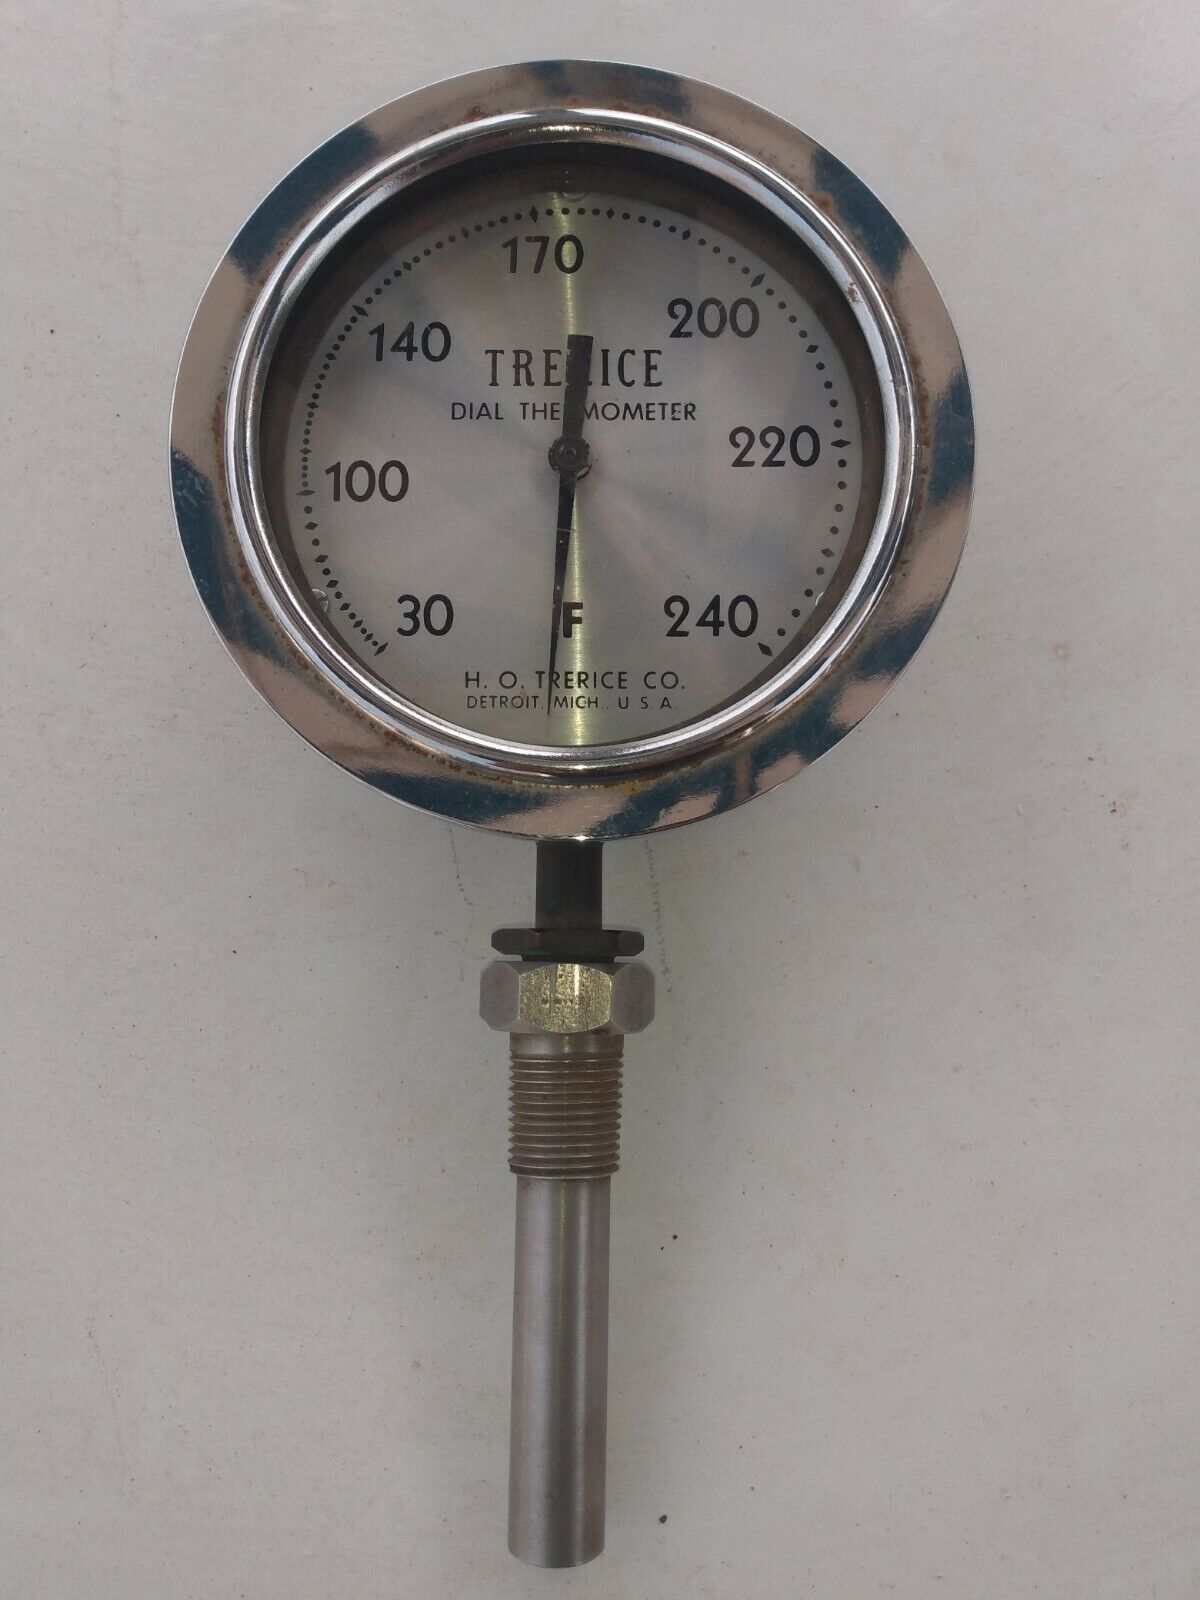 Trerice Detroit Mich. U.S.A. vintage 30-240 Dial Thermometer